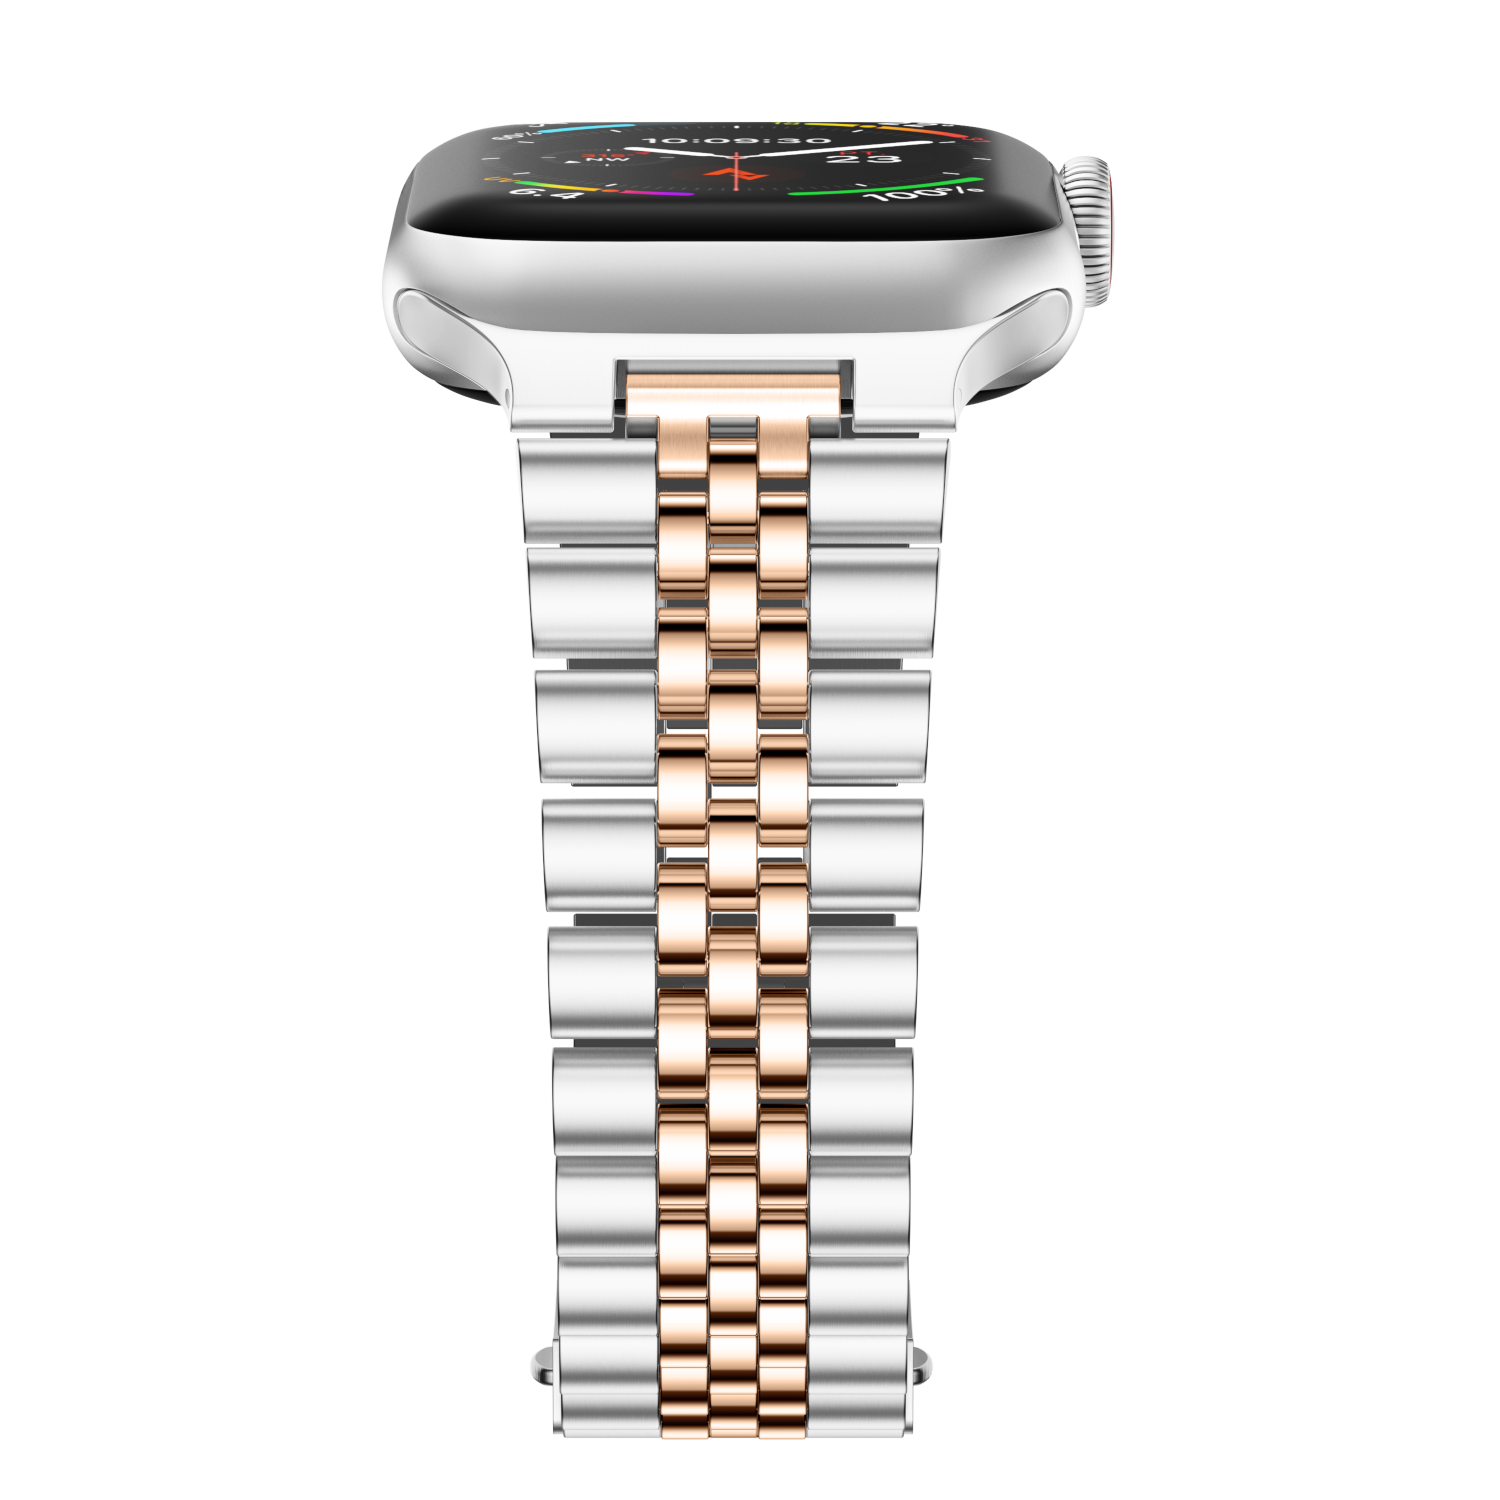 Stainless Steel Link Bracelet Band - The Perth in Silver and Rose - Compatible with Apple Watch Size 38mm to 41mm - Friendie Pty Ltd